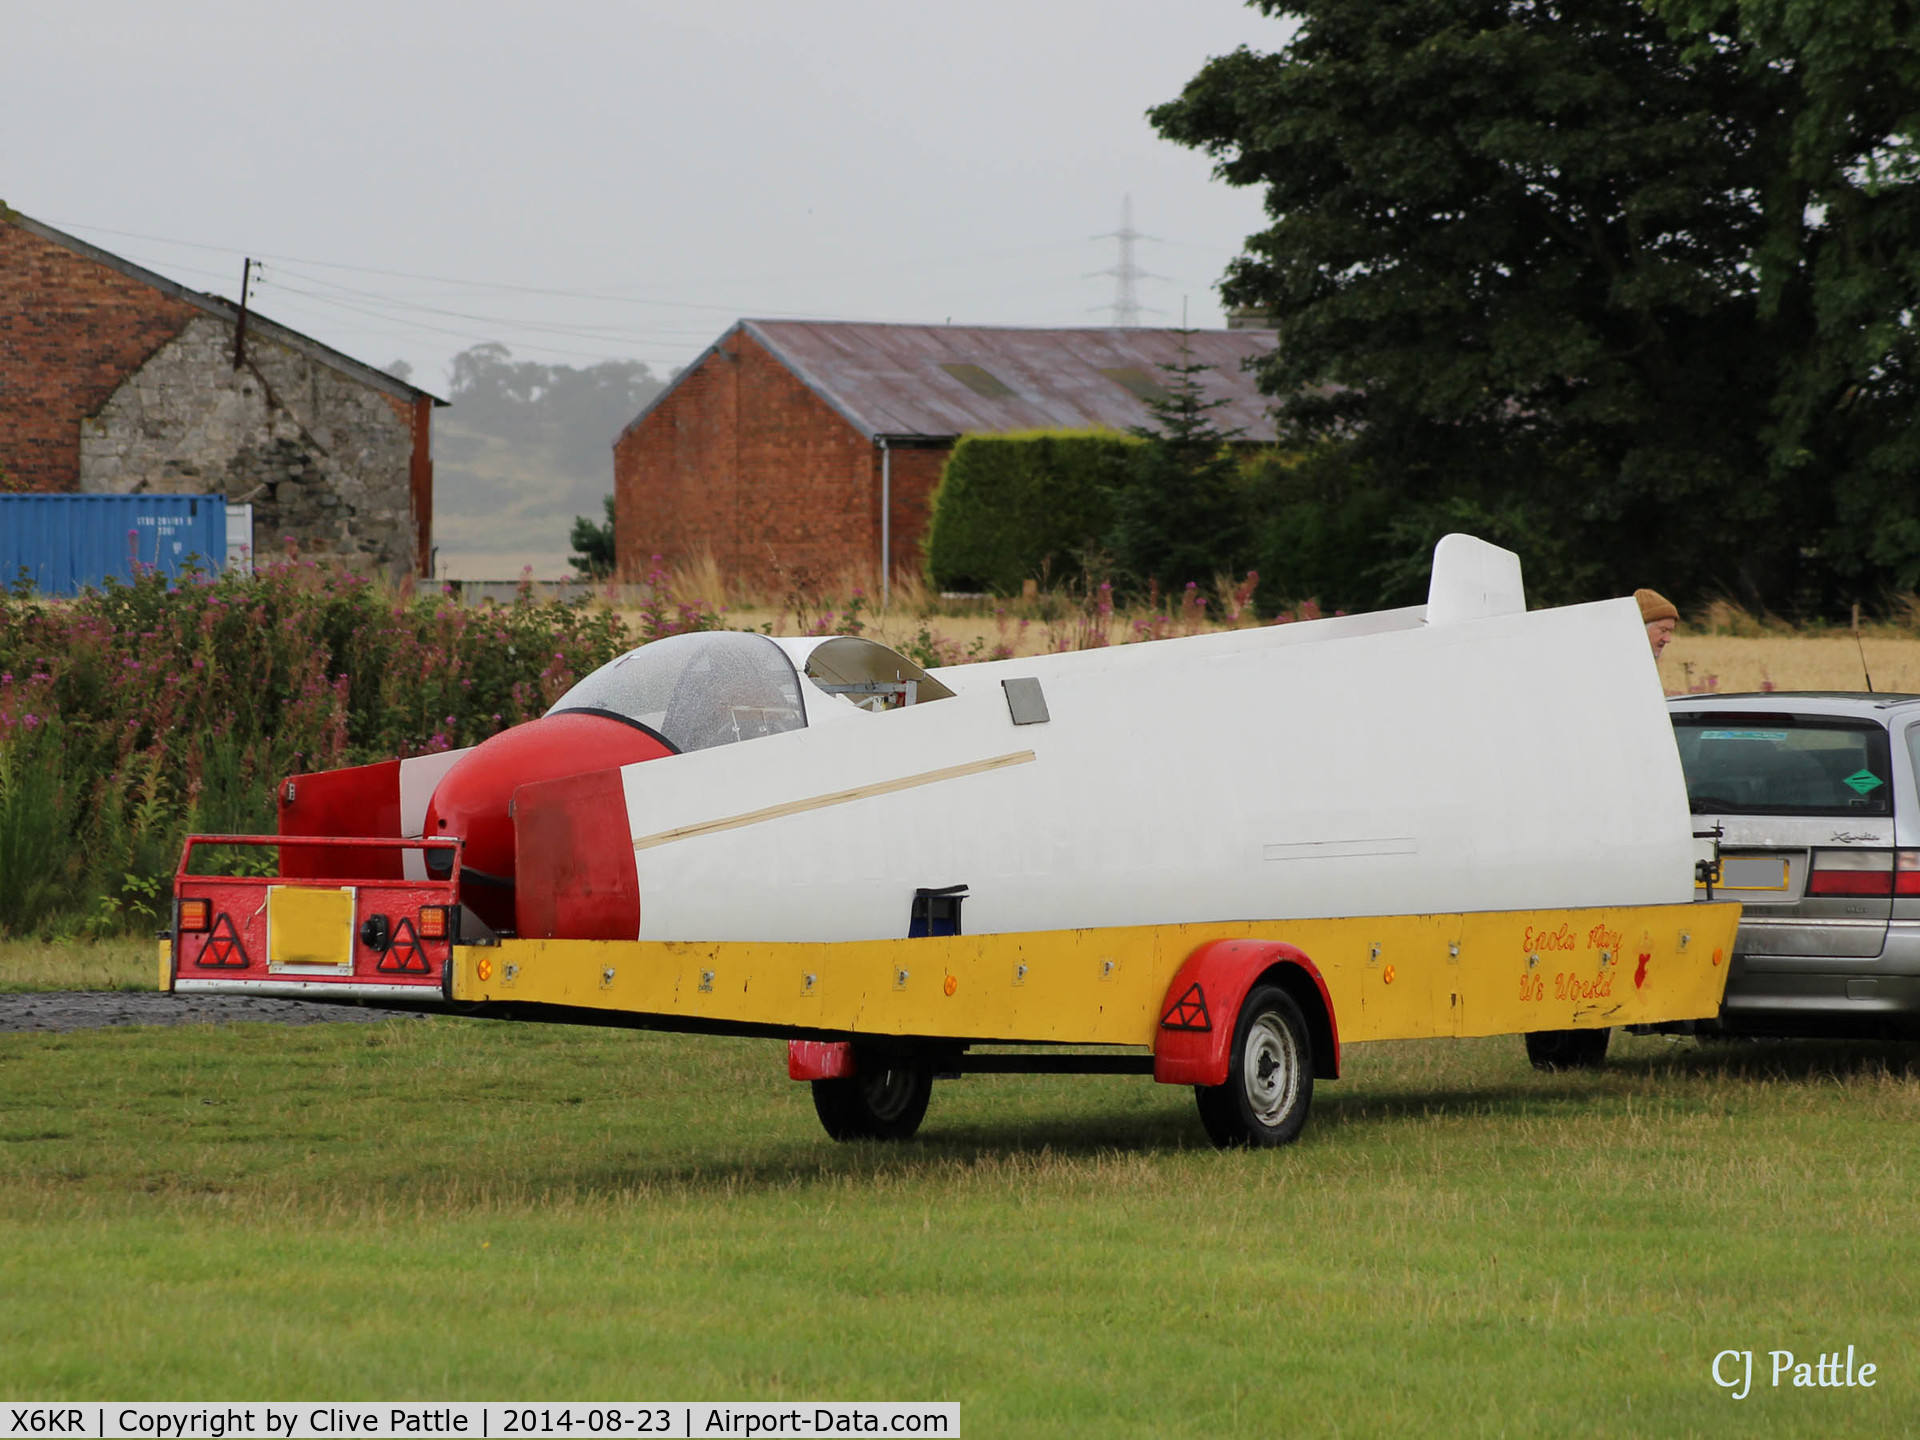 X6KR Airport - Portmoak Gliding Field, Kinross, Scotland - All packed up and finished for the day.